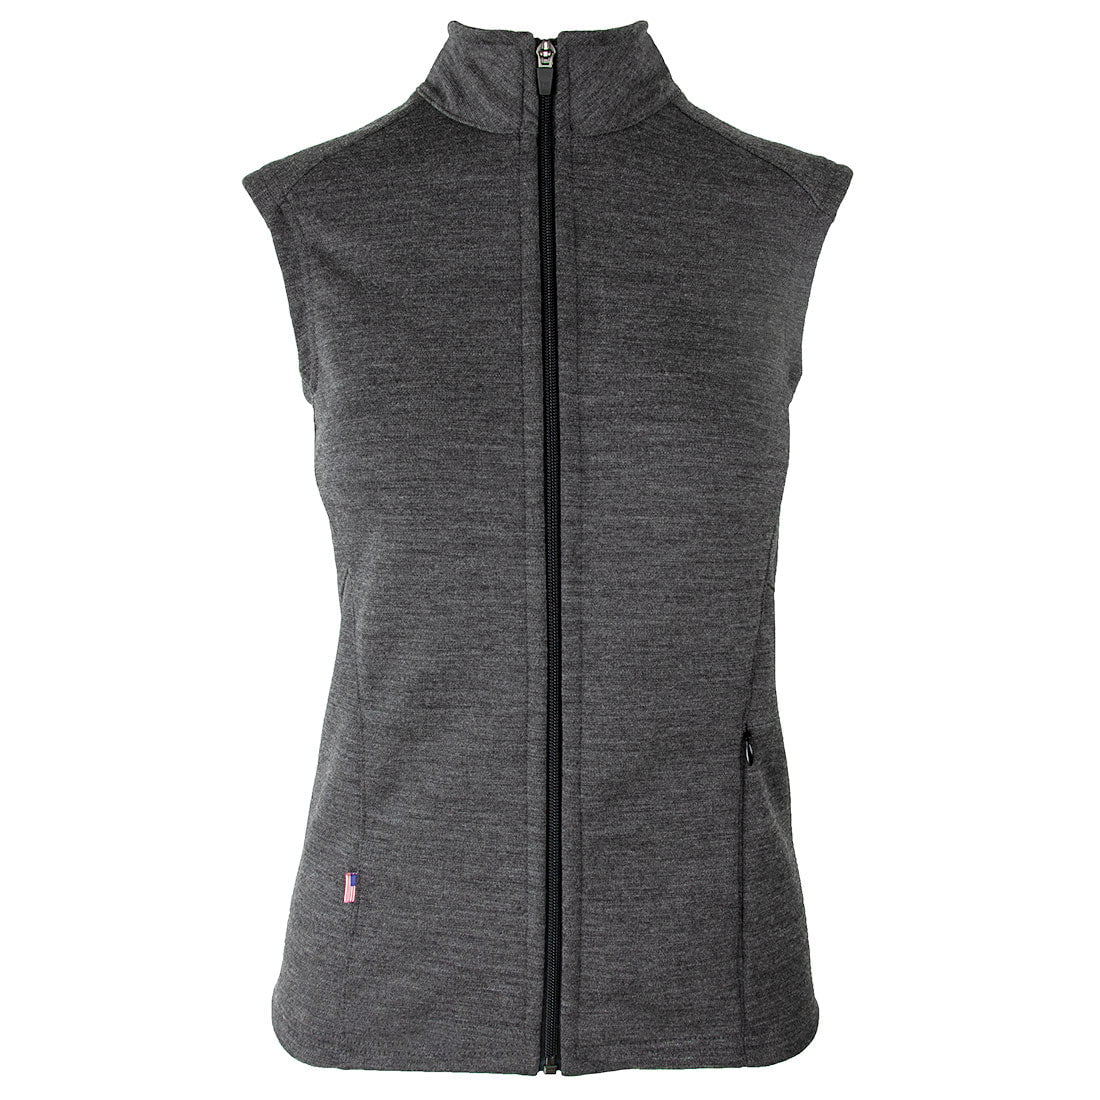 New! 100% Merino Wool Vest (Women's) - Made in Ely, MN, USA